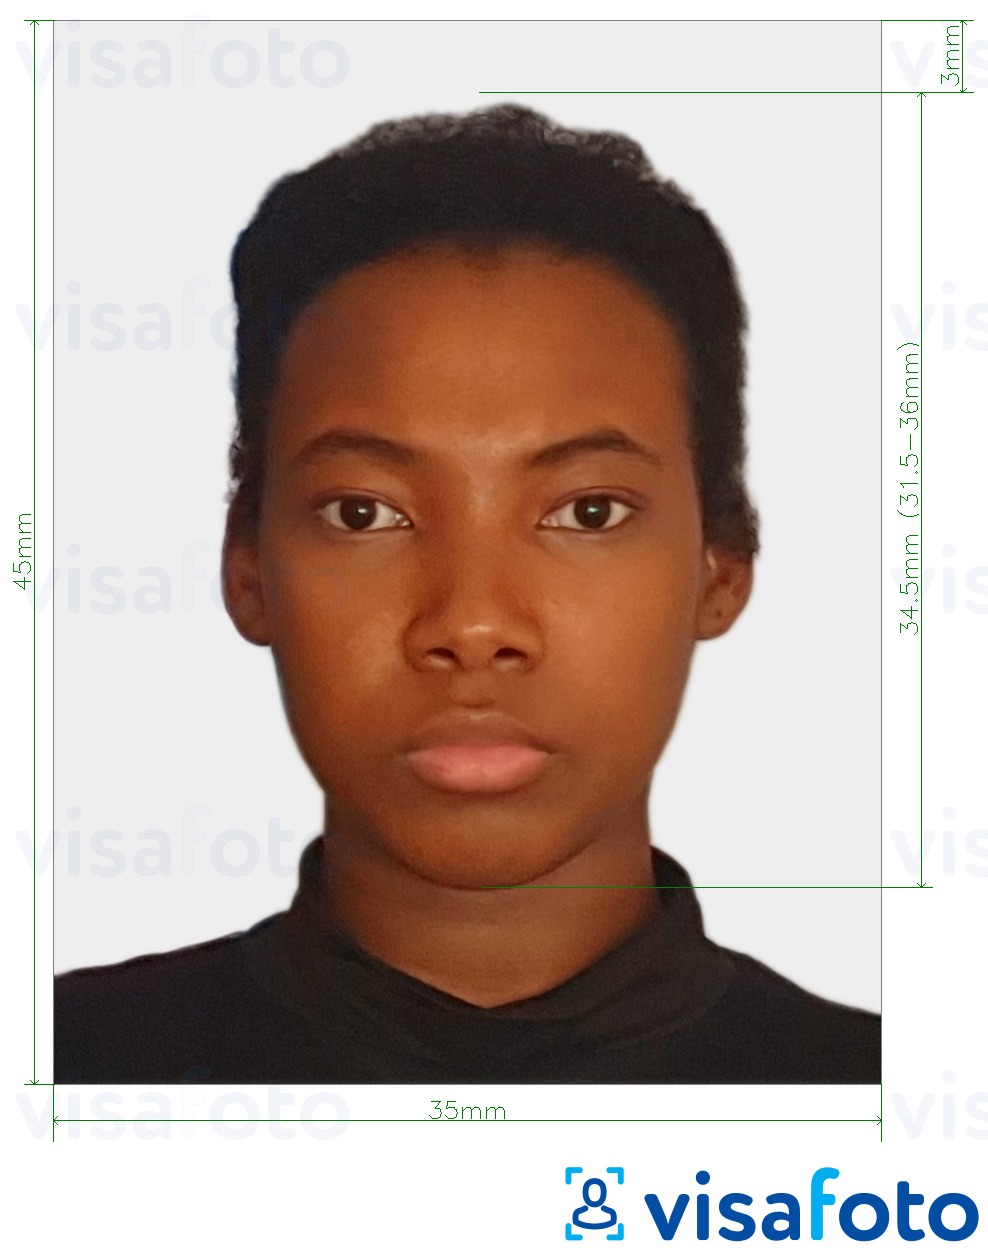 Example of photo for Zimbabwe visa 35x45 mm (3.5x4.5 cm) with exact size specification